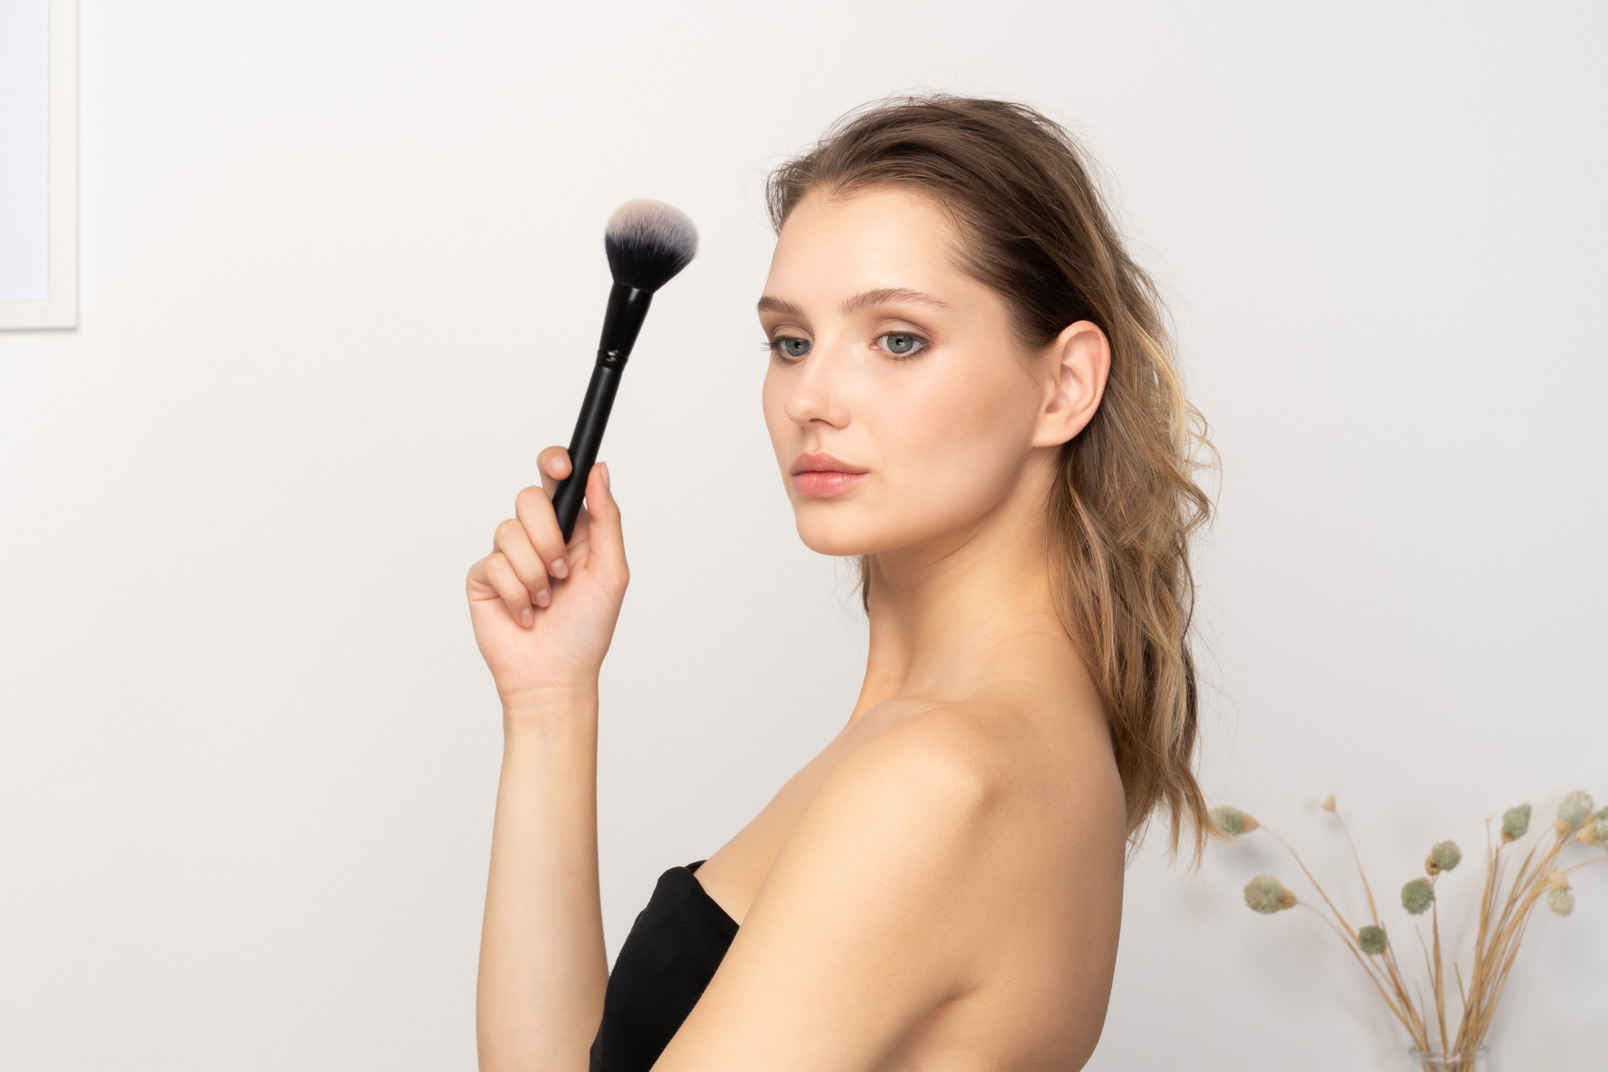 Side view of a sensual young woman holding a make-up brush & looking at camera